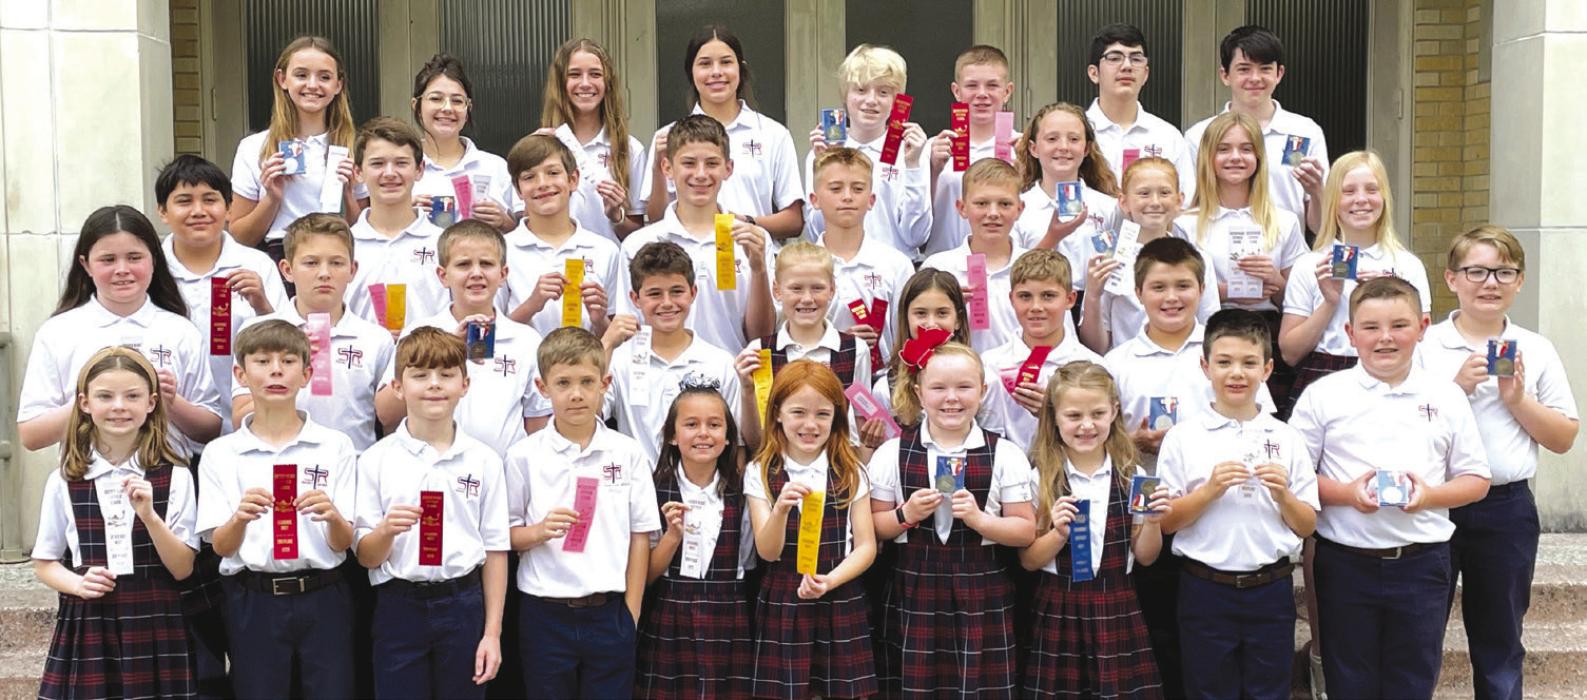 St. Rose Students Compete in Hallettsville